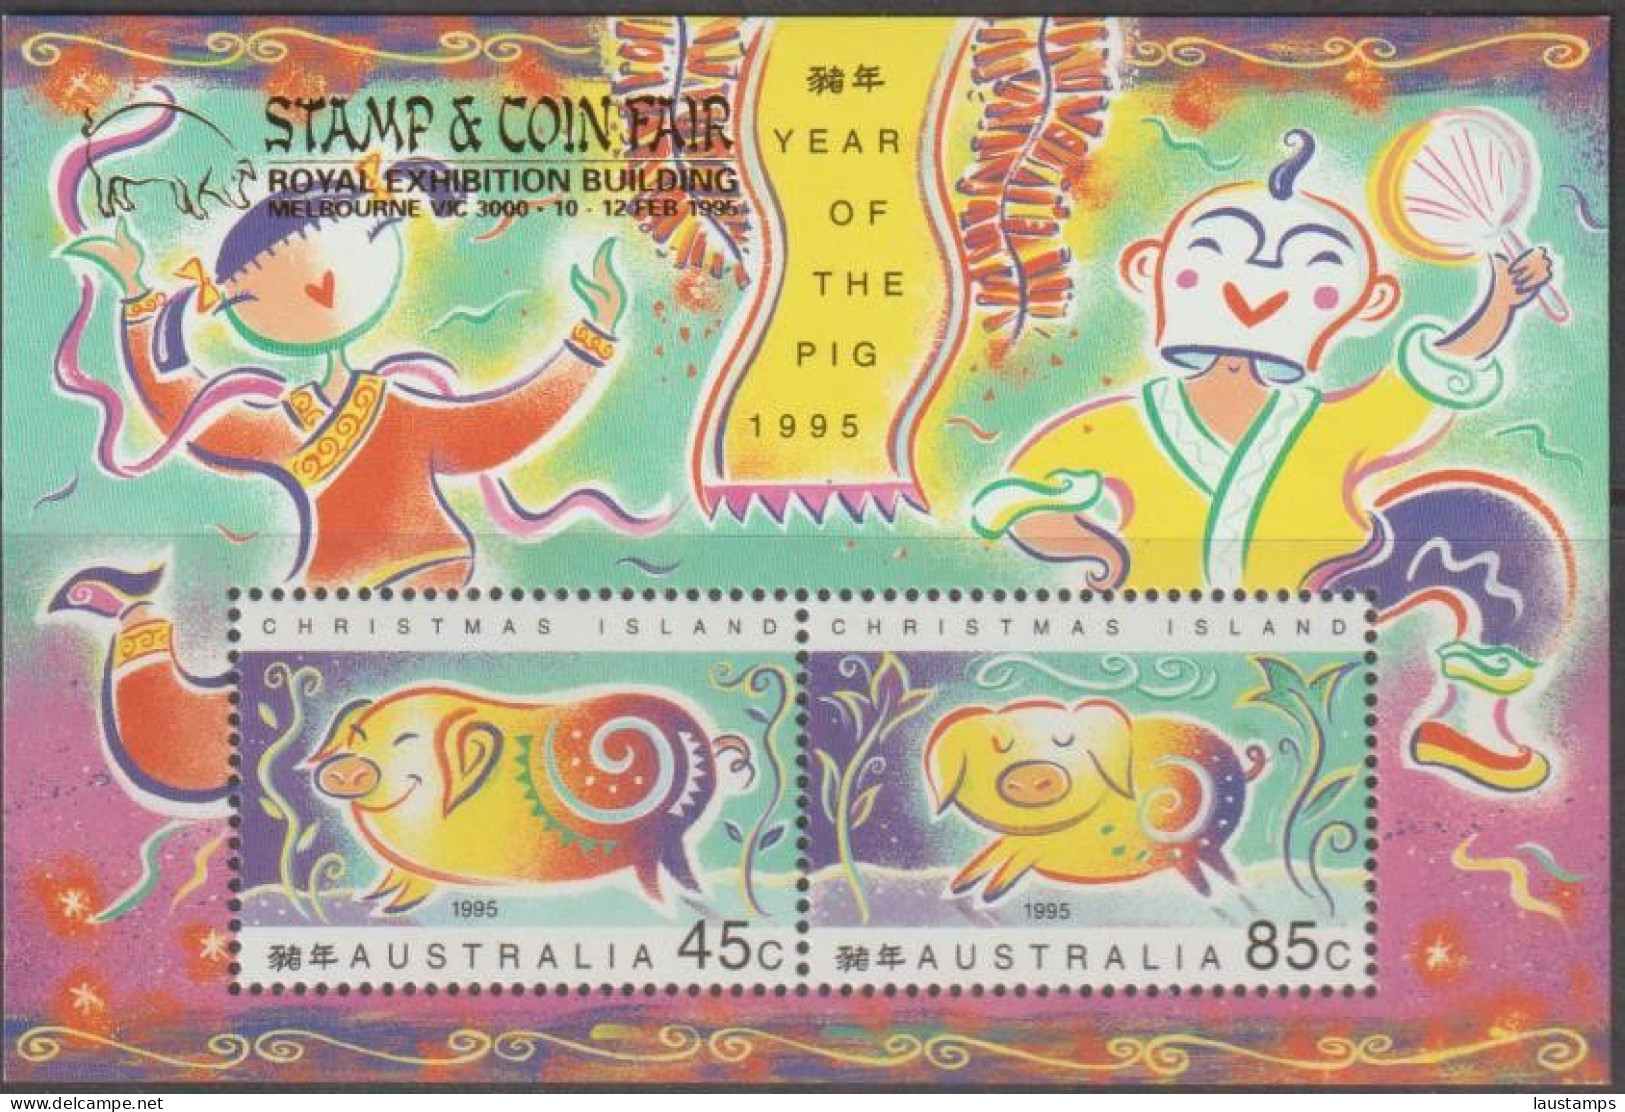 Christmas Island 1995 Year Of The Pig Ovpt Stamp & Coin Fair Melbourne S/S MNH - Nouvel An Chinois